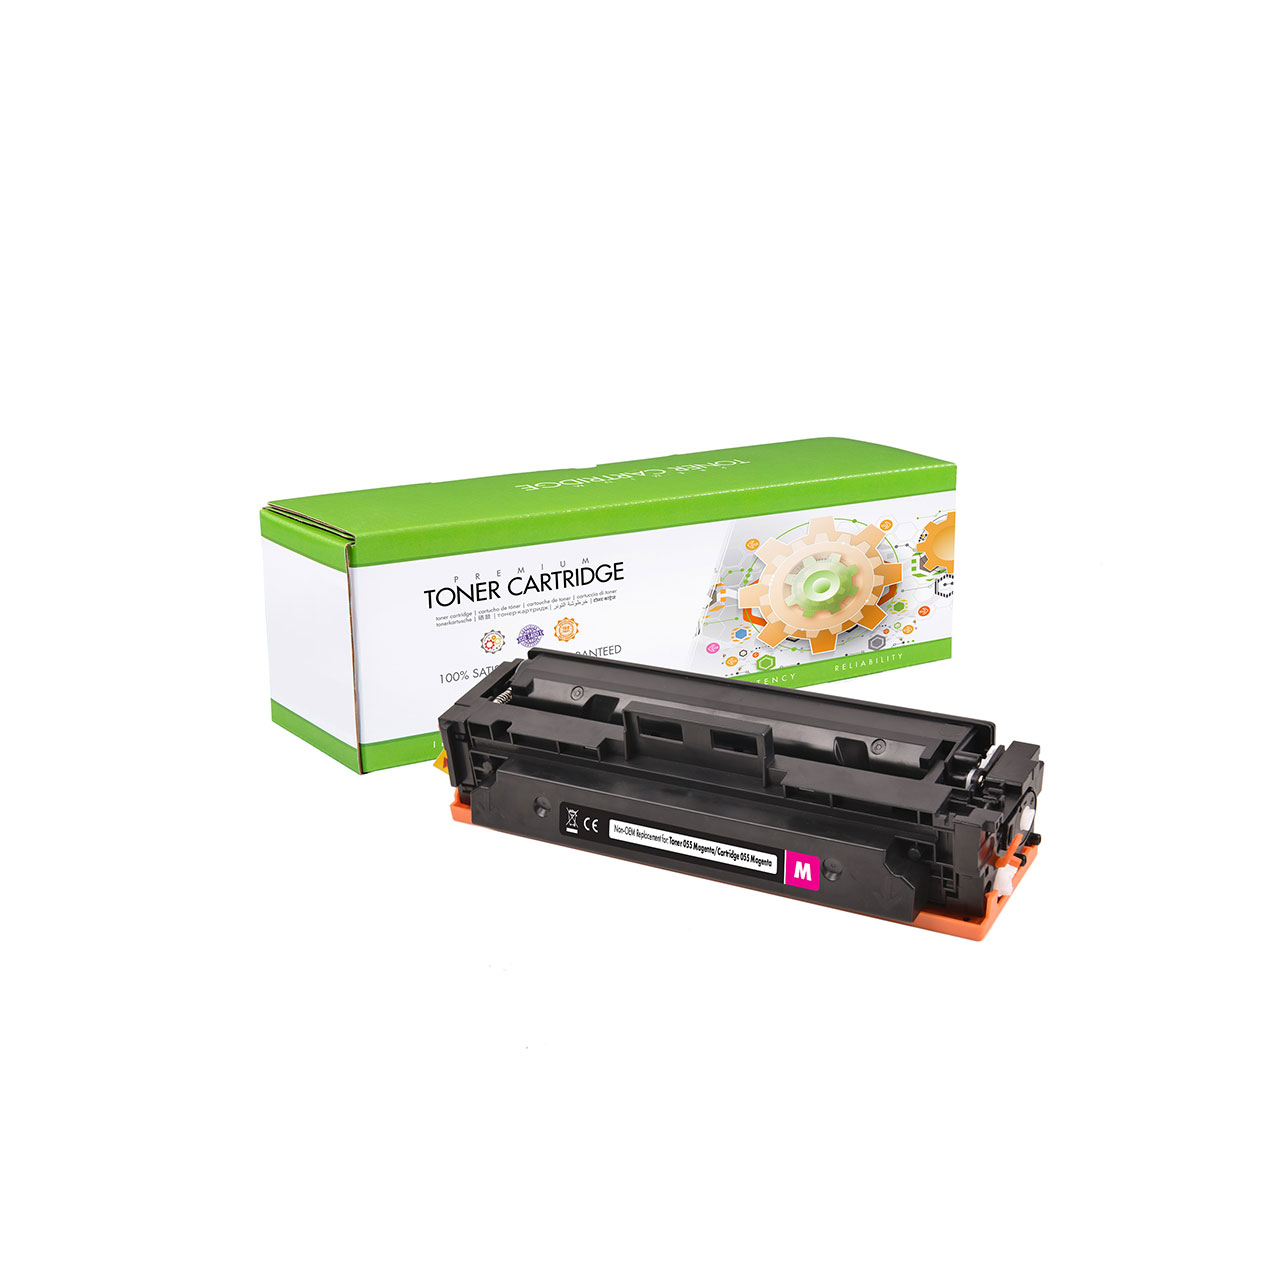 Static Control® toner cartridge replacement for Canon 055 Magenta